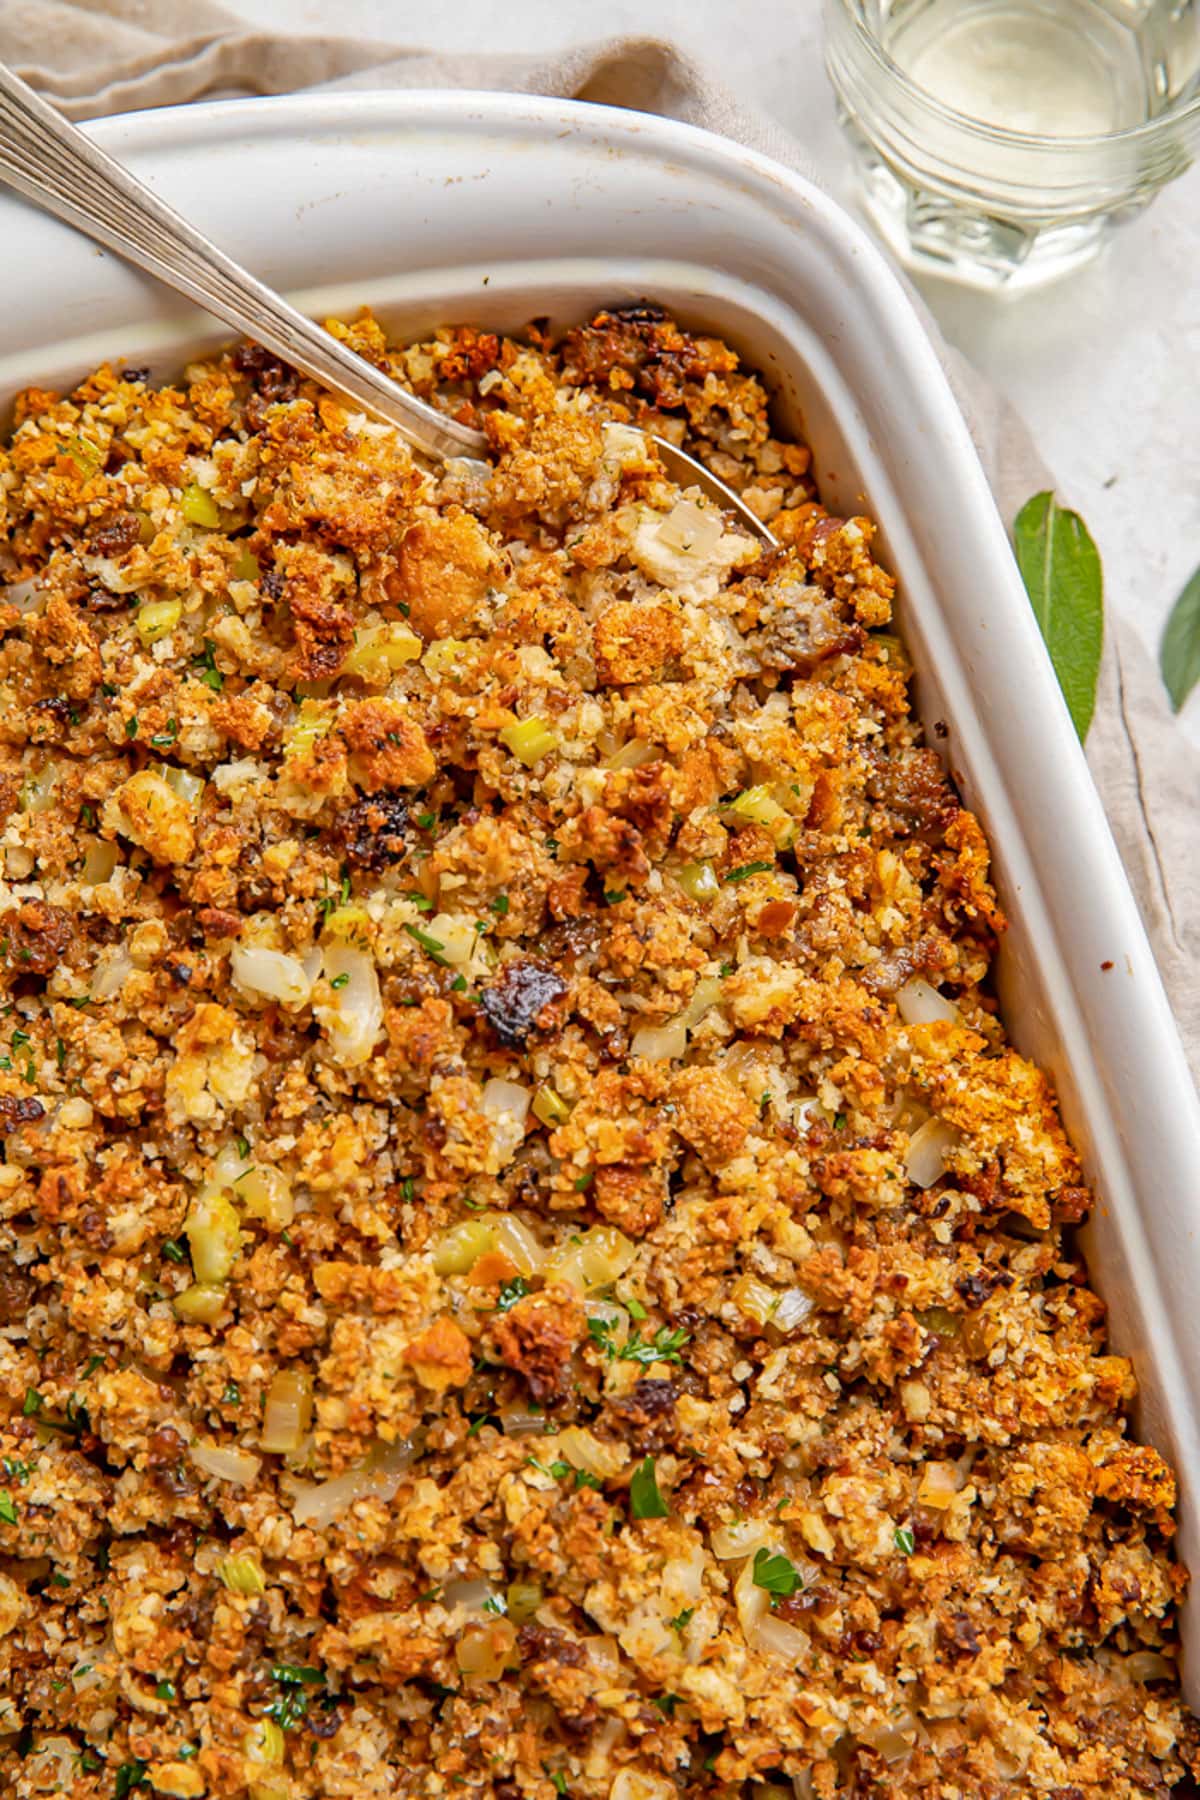 Sausage stuffing in a white rectangular casserole dish with a large spoon.